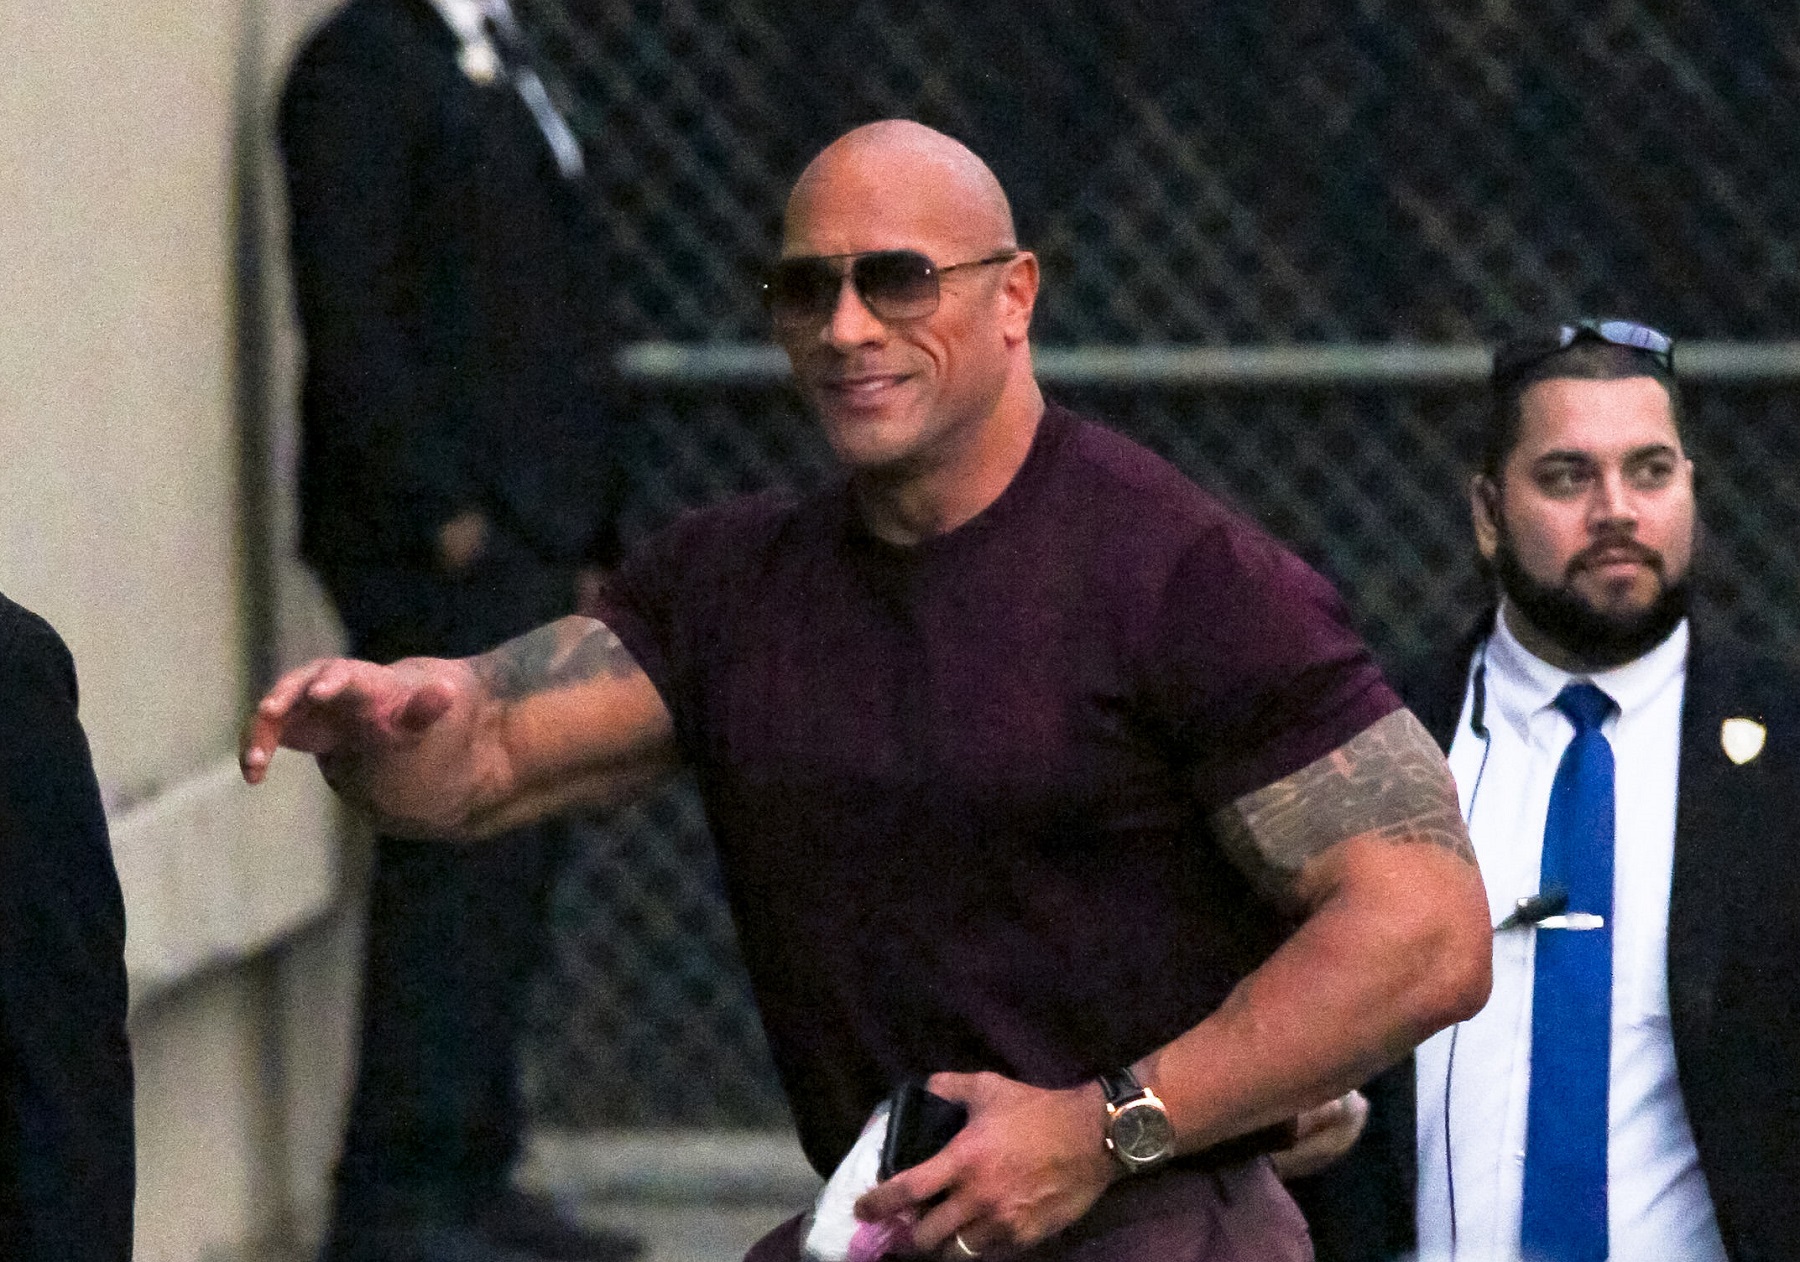 Dwayne Johnson Gave a Former WWE Star an Awesome Christmas Gift